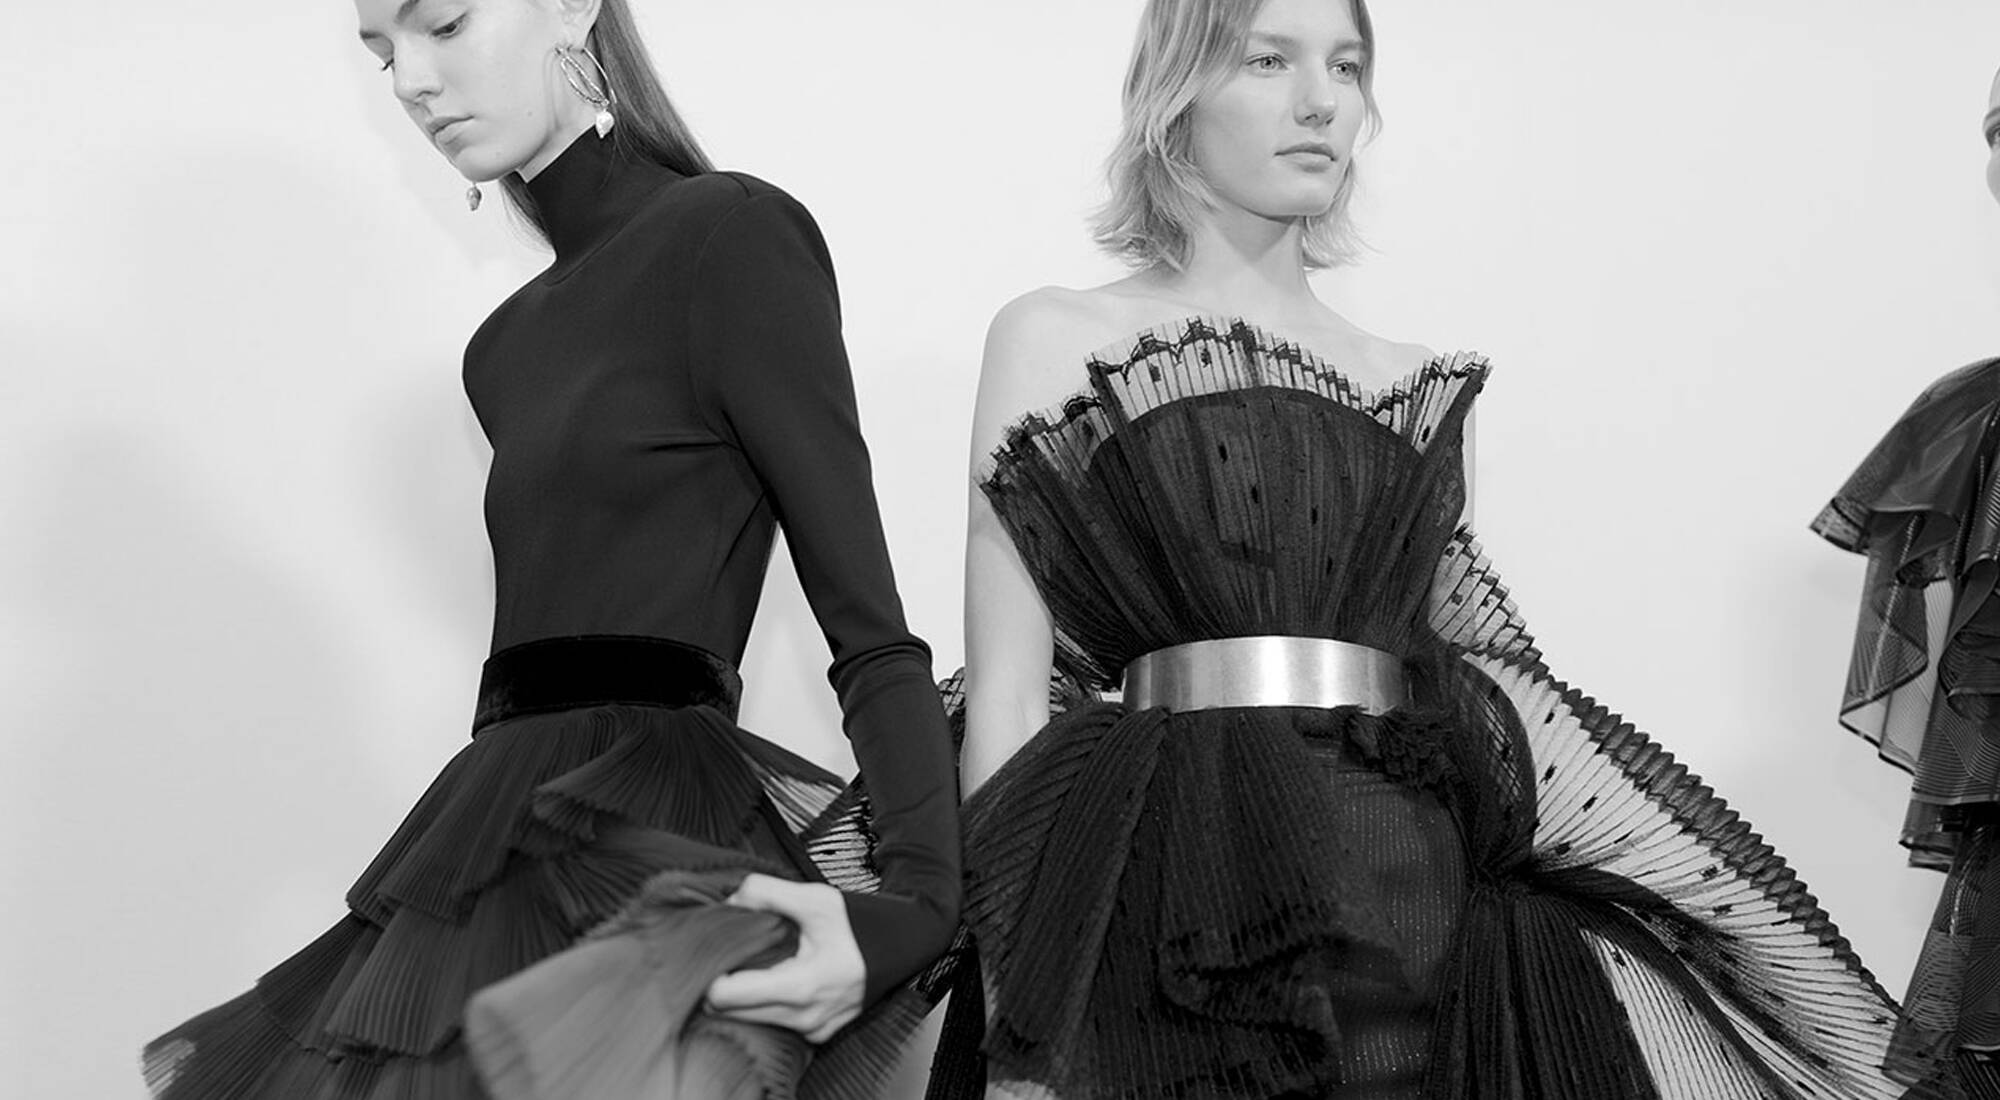 LVMH - Givenchy presented its haute couture collection for